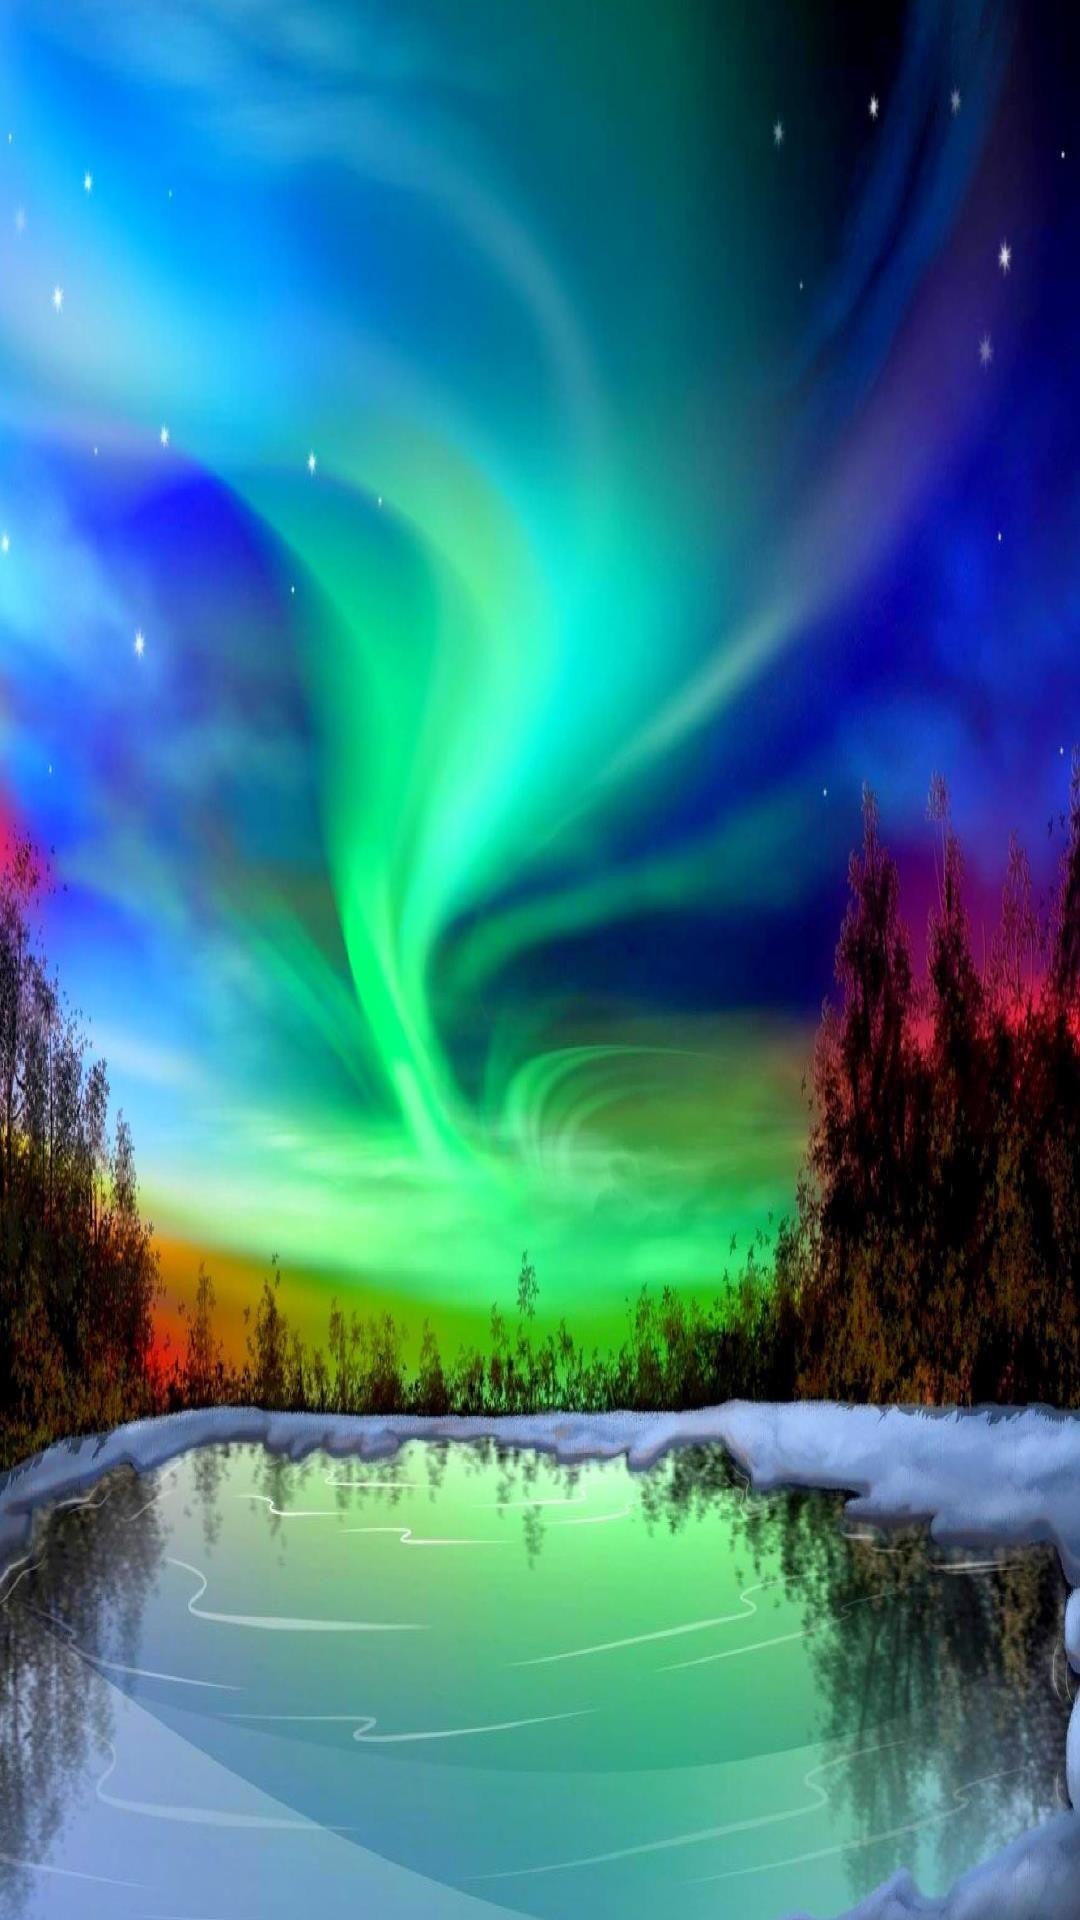 aurora over lake Apple iPhone 7 HD wallpaper available